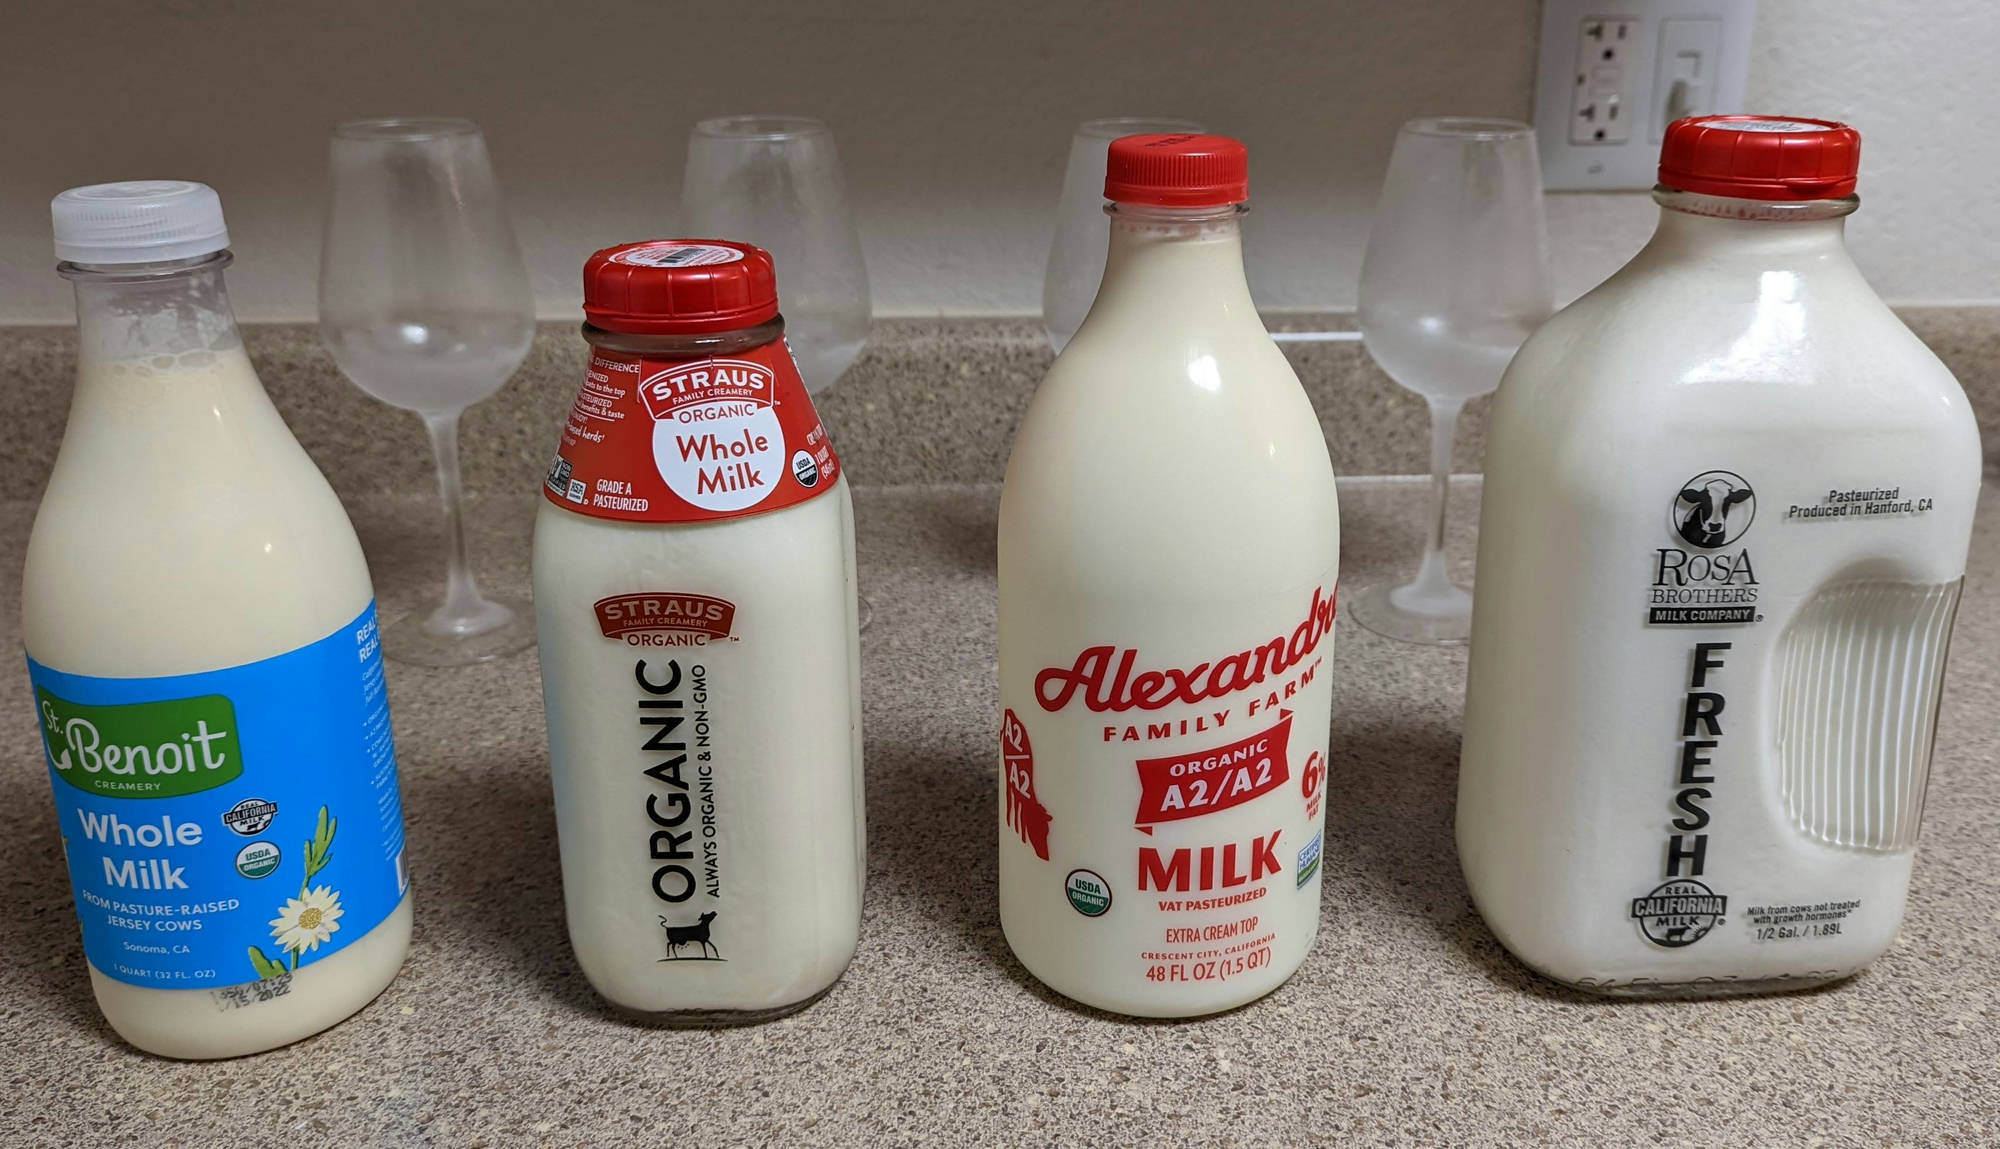 Rosa Brothers Milk Company - Drink Milk In Glass Bottles